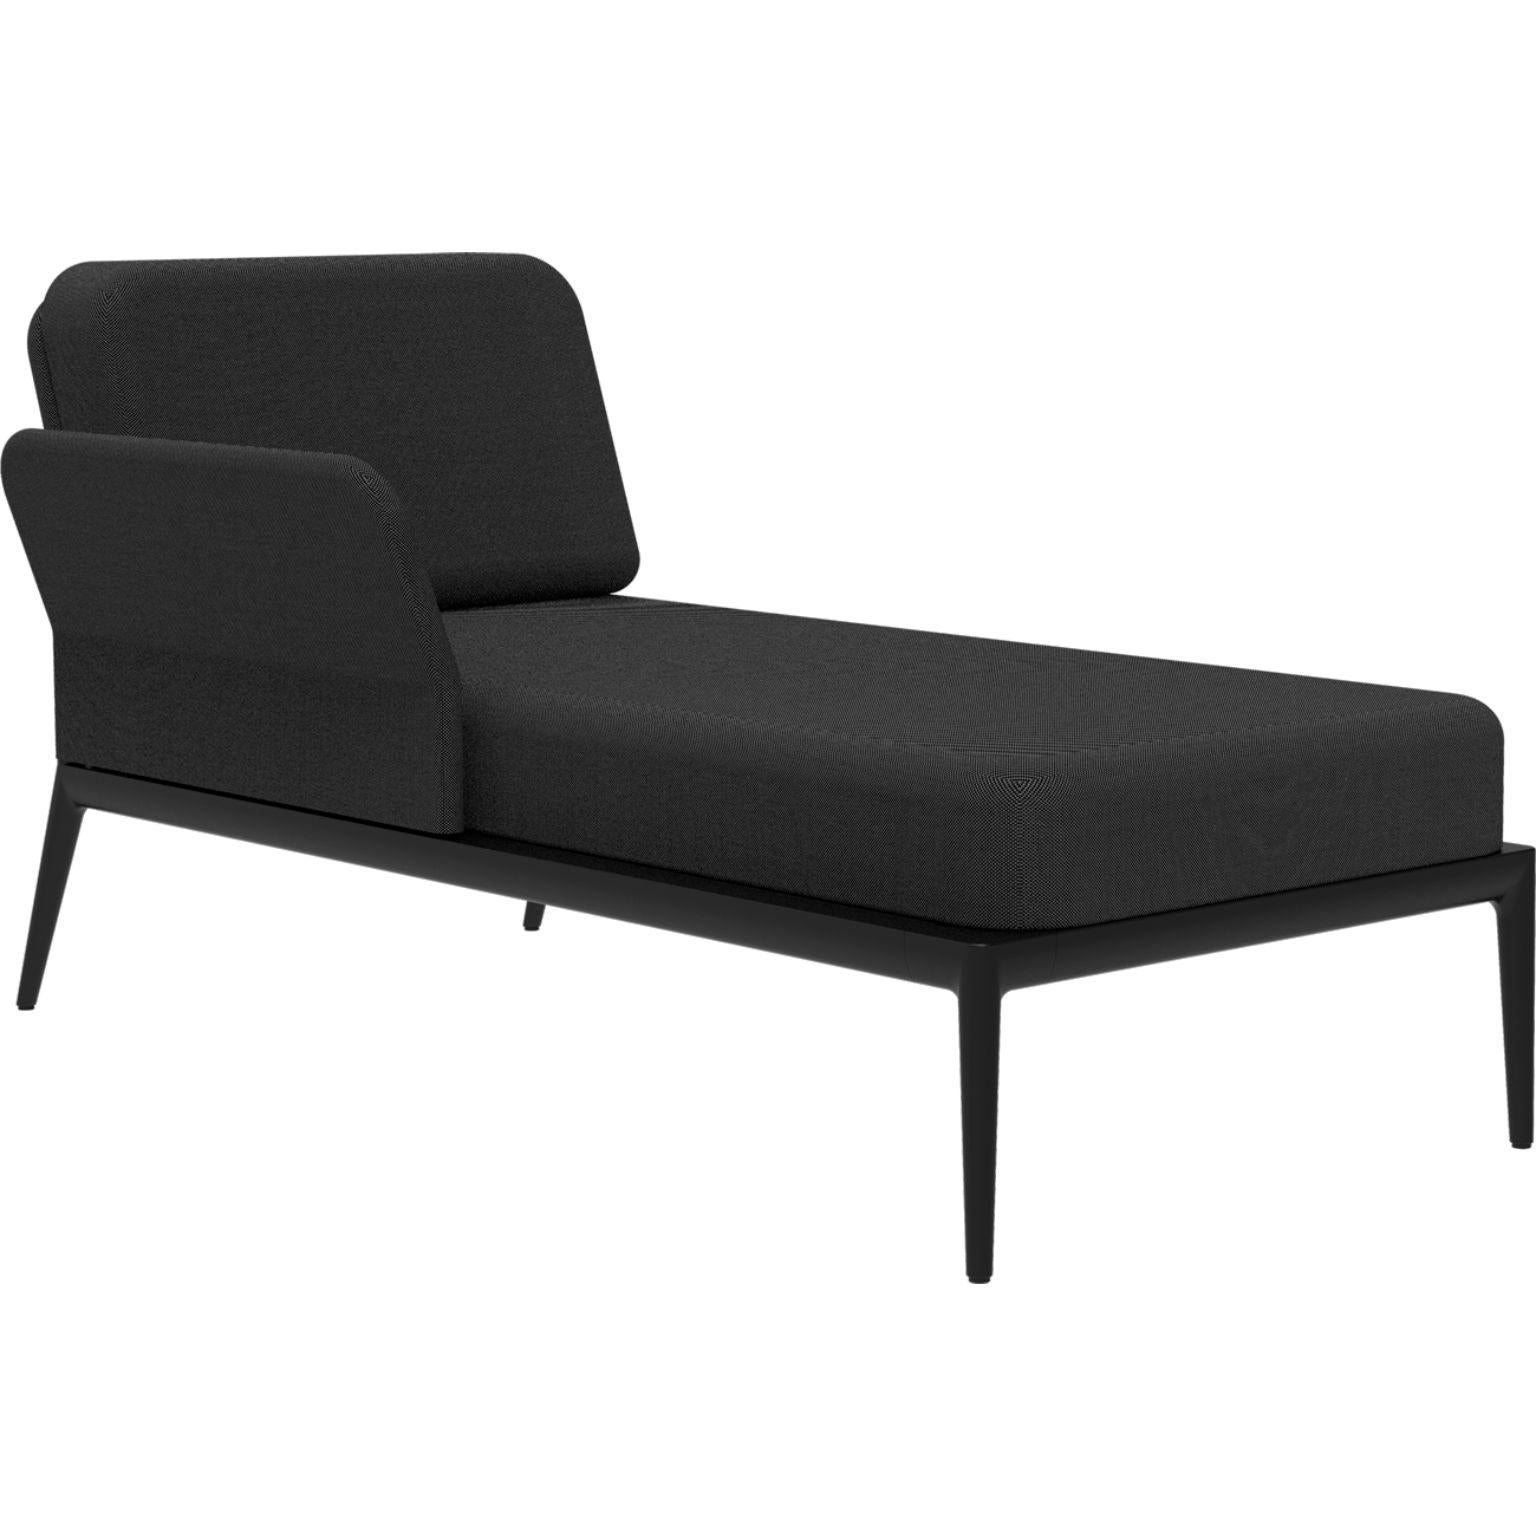 Cover Black Right Chaise Longue by MOWEE
Dimensions: D 80 x W 155 x H 81 cm (seat height 42 cm).
Material: Aluminum and upholstery.
Weight: 28 kg.
Also available in different colors and finishes. Please contact us.

An unmistakable collection